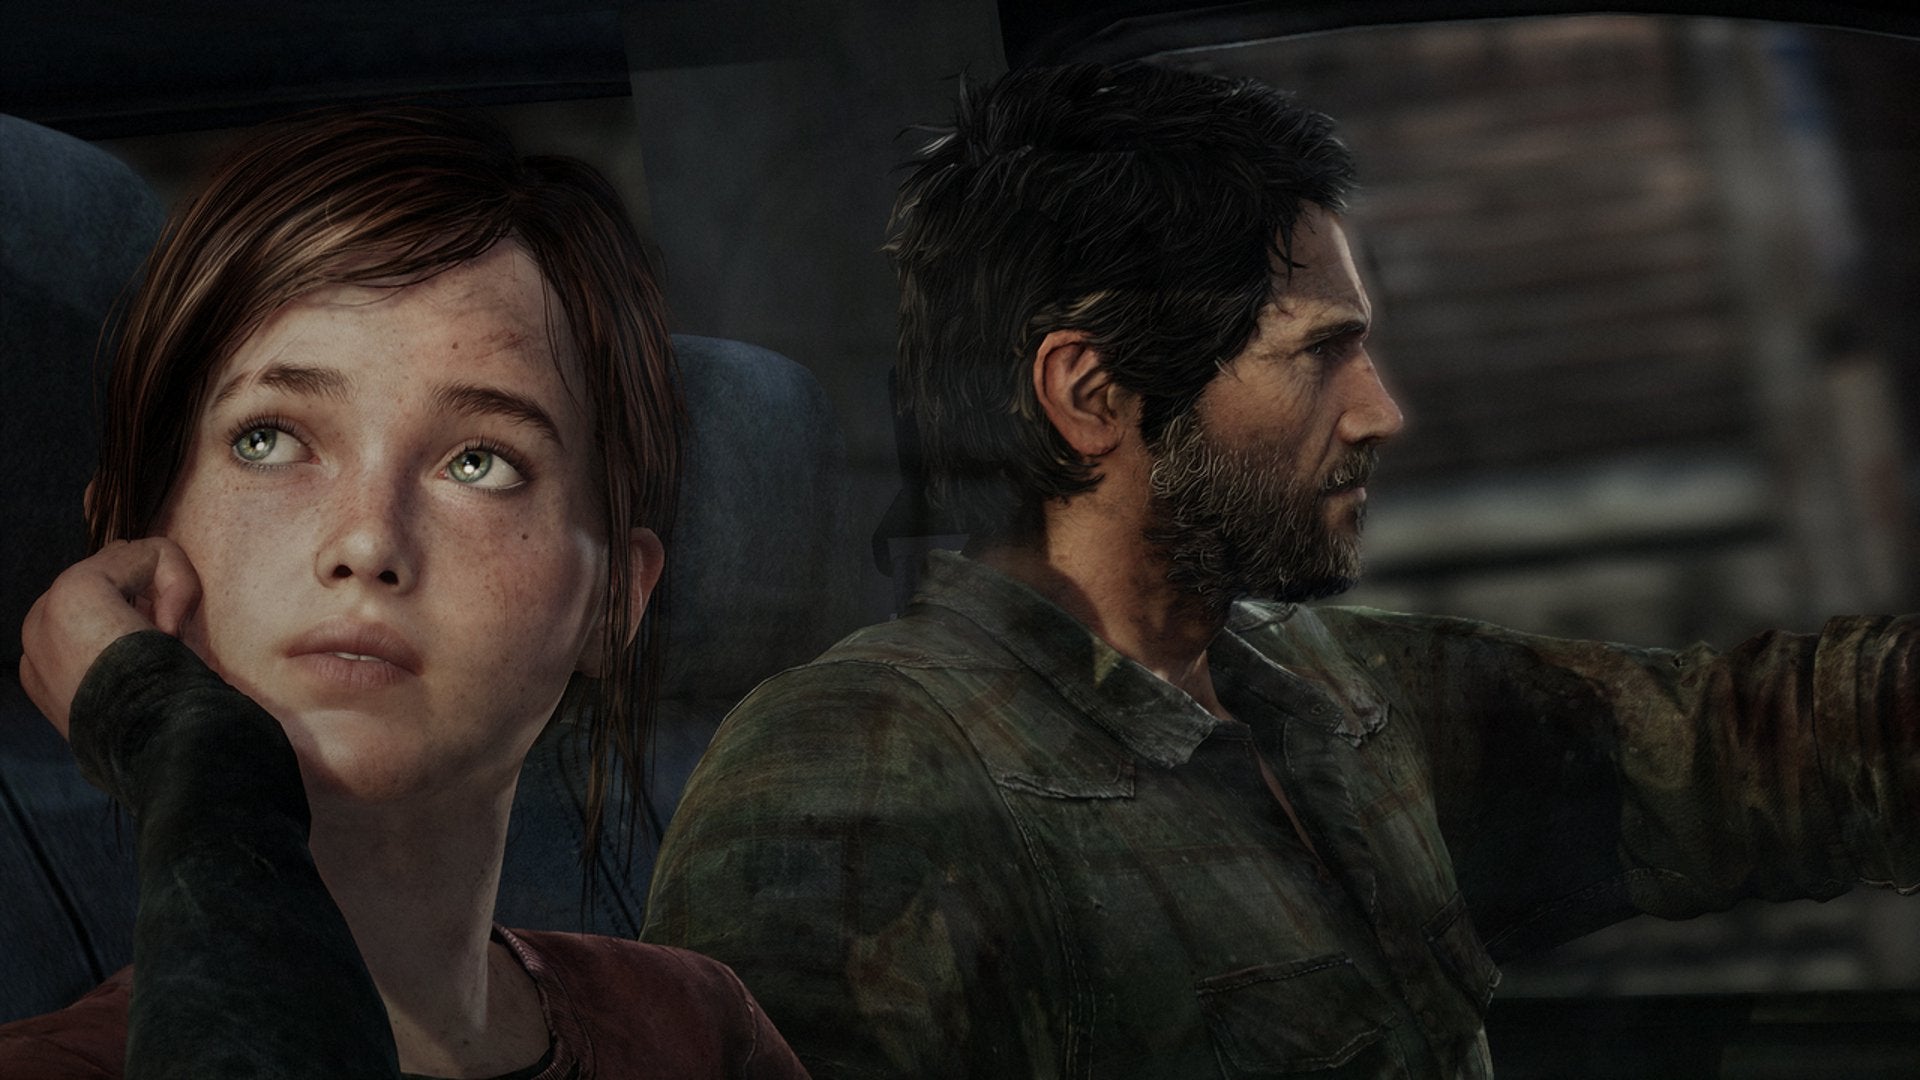 Image for Let's Play The Last of Us Remastered on PS4 Pro at 4K